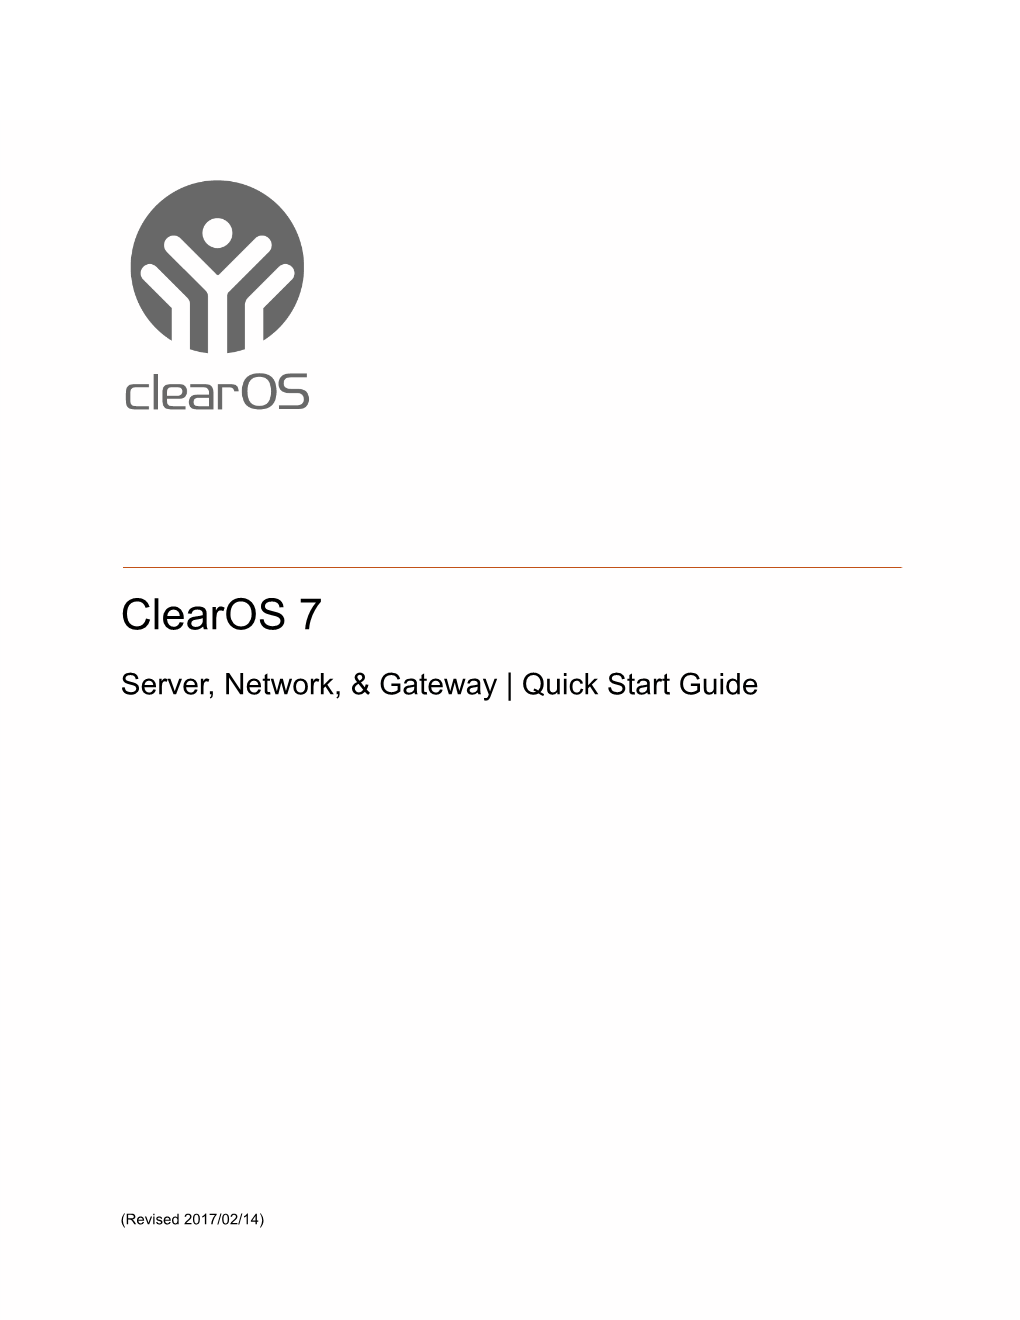 Clearos 7 Server, Network, & Gateway | Quick Start Guide